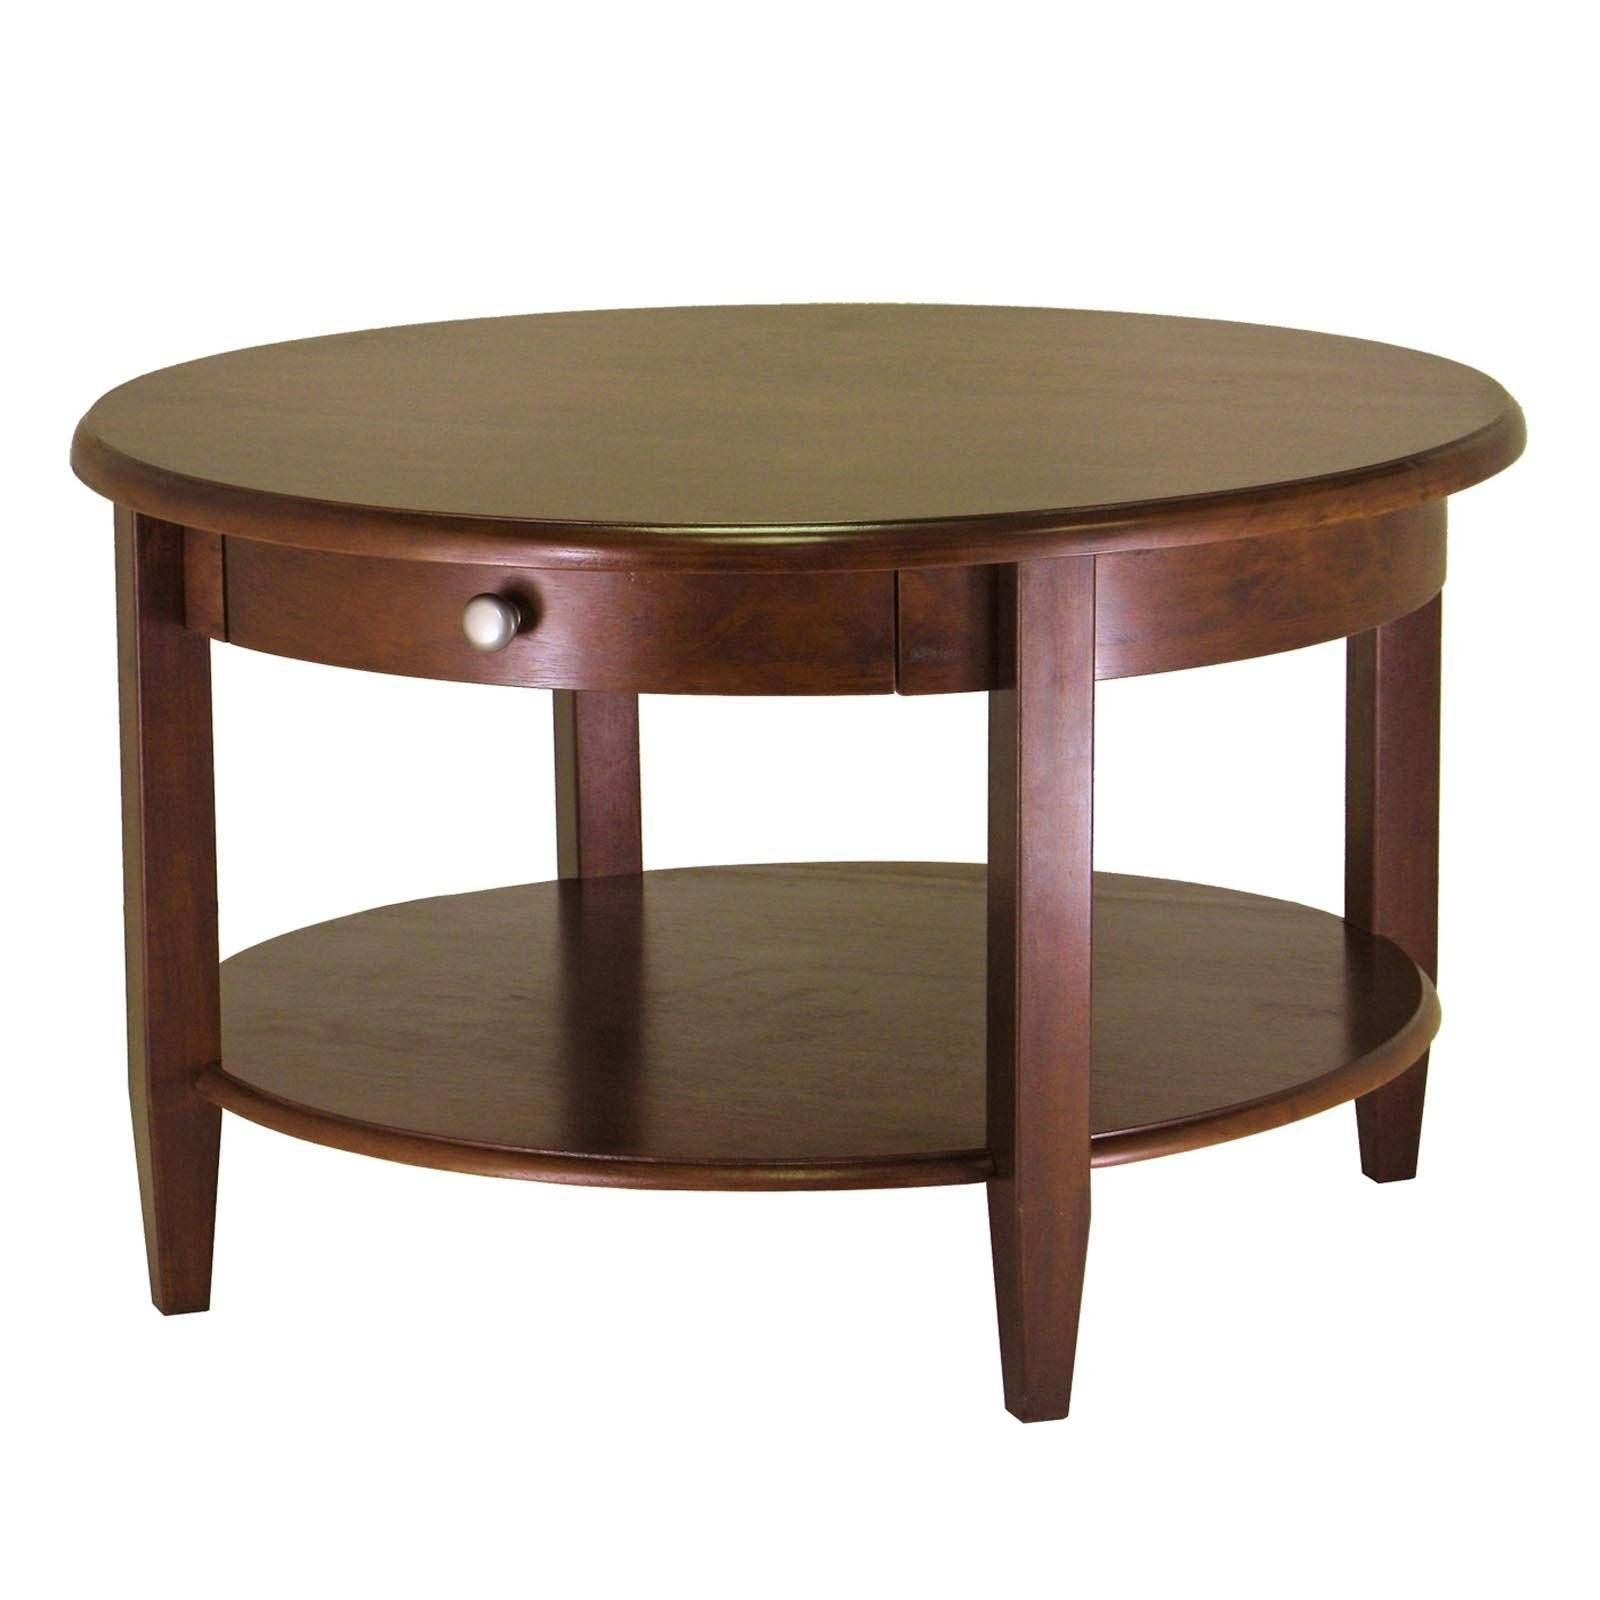 Coffee Table: Simple Small Round Coffee Table Design Ideas Round In Small Coffee Tables With Shelf (View 3 of 30)